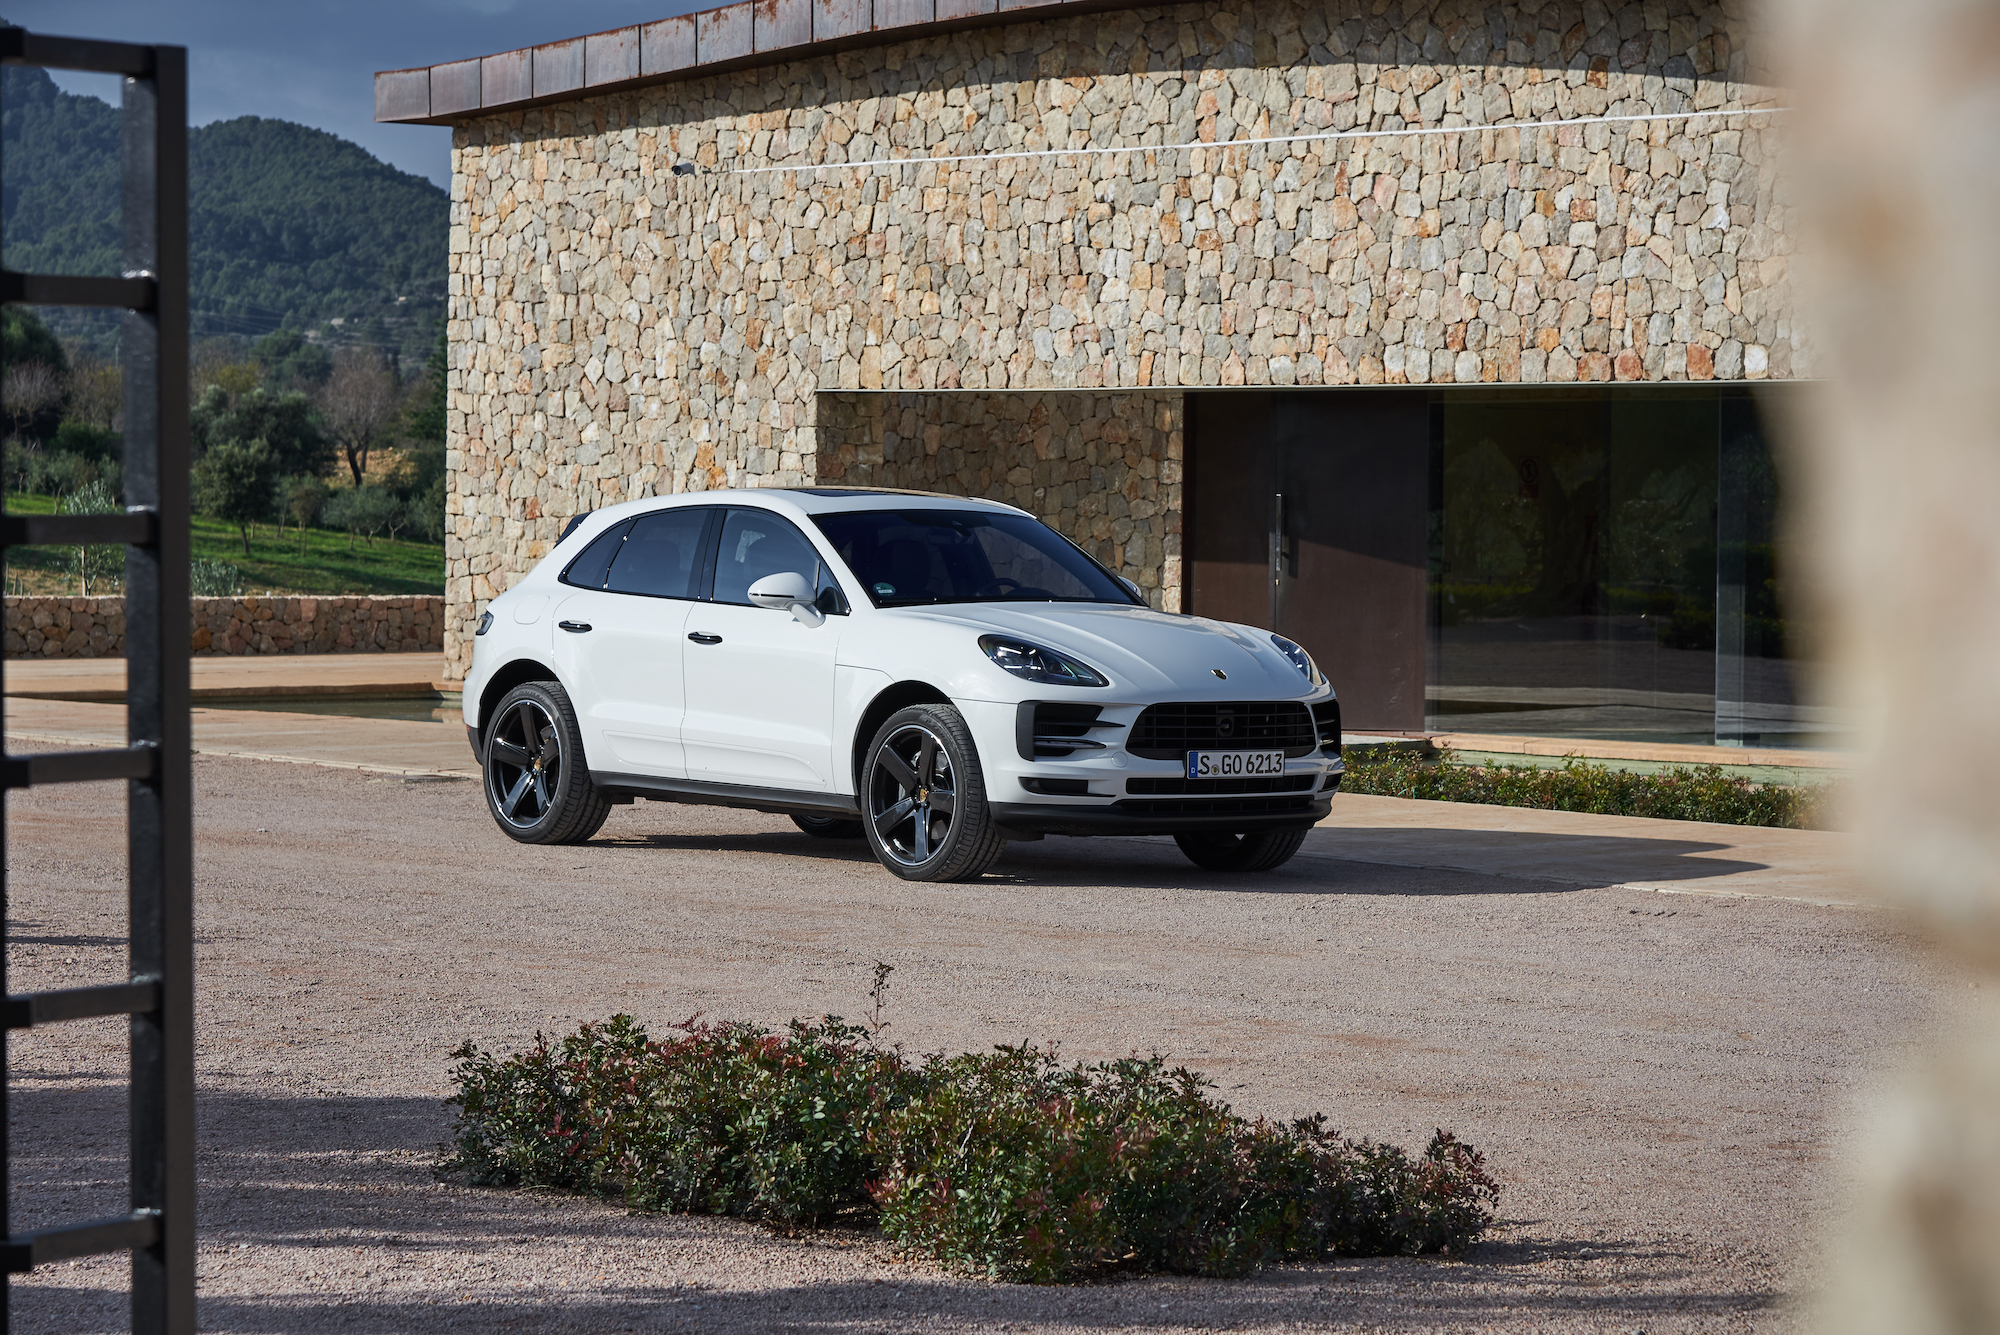 A white 2021 Porsche Macan luxury compact crossover SUV parked outside a stone building with mountains in the background